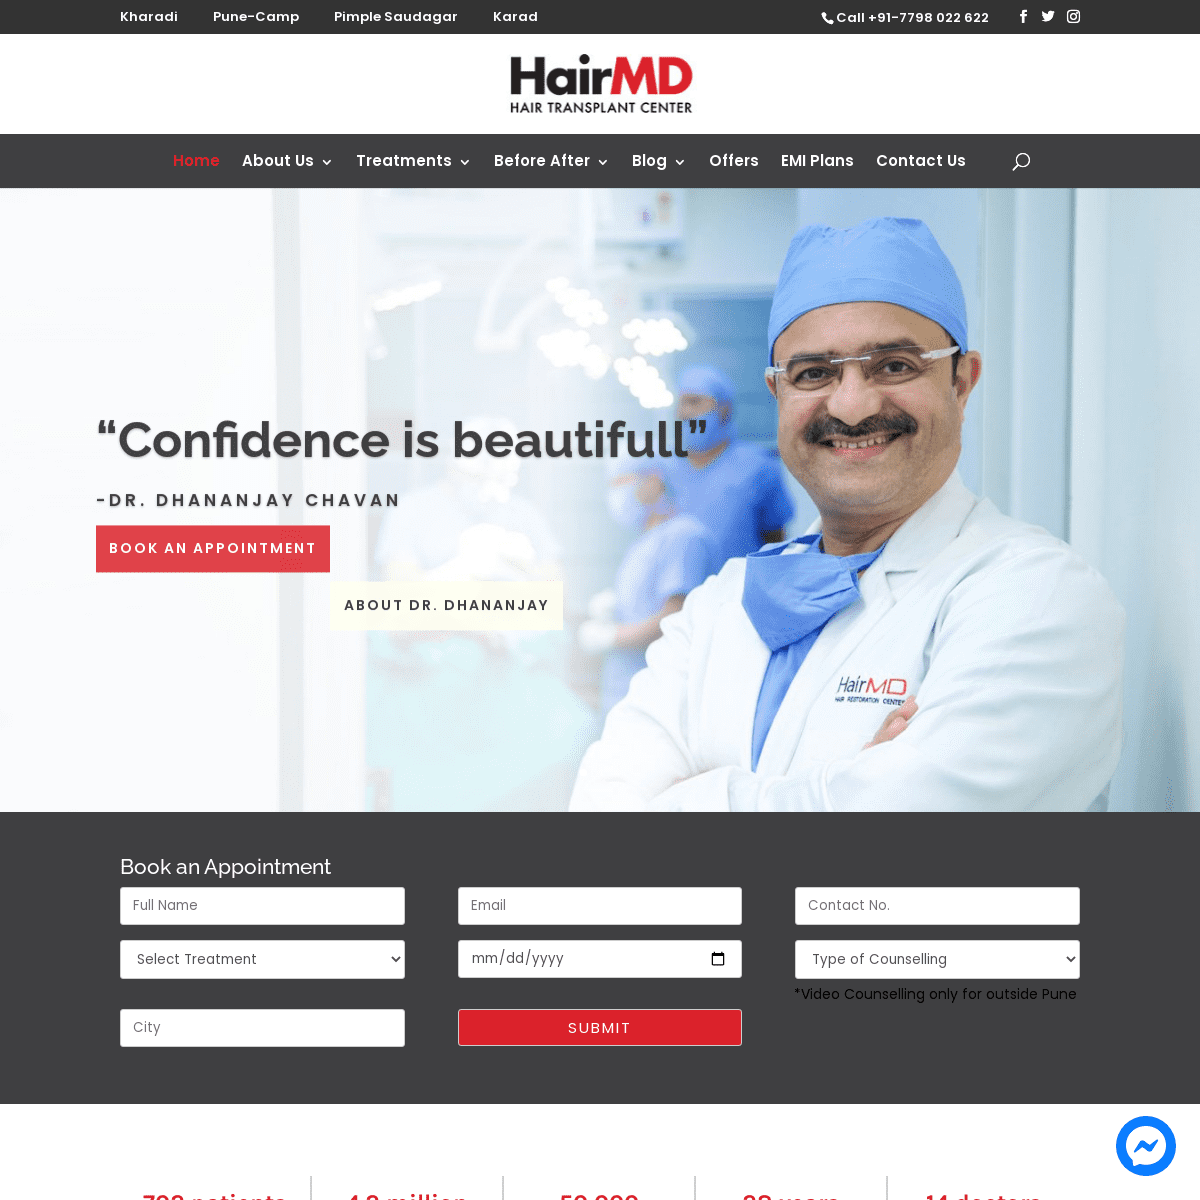 A complete backup of https://hairmdindia.com